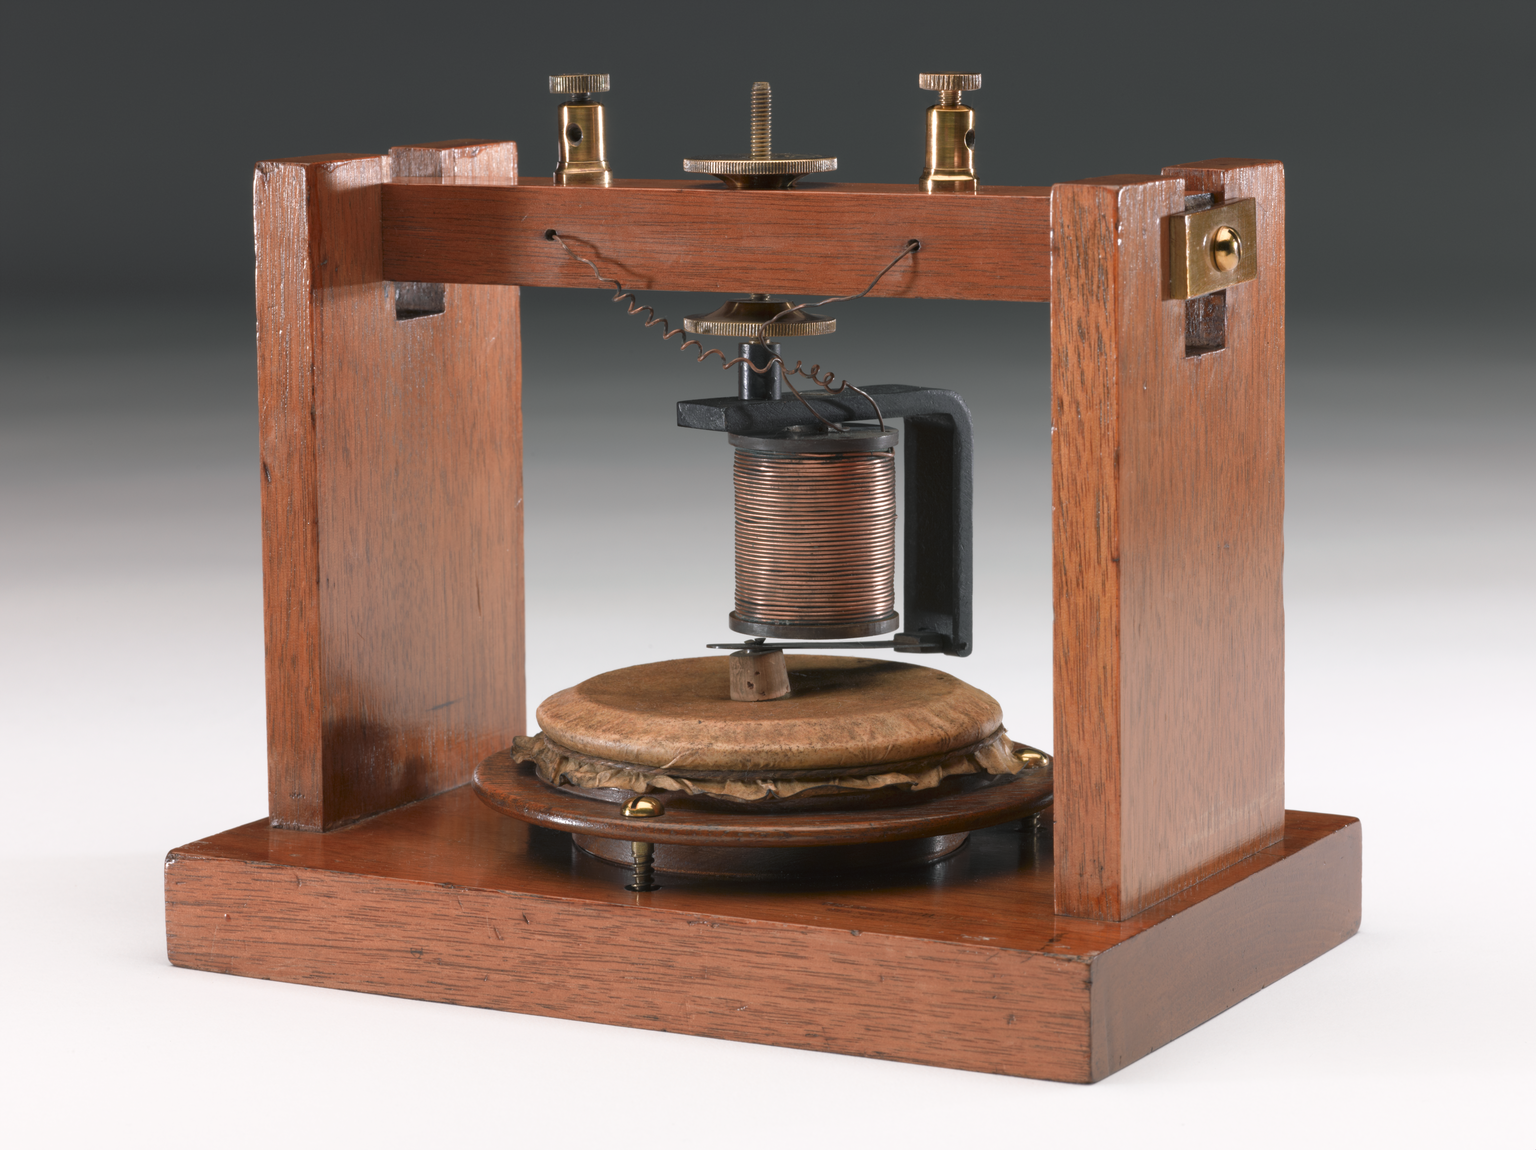 An exact replica of Bell's first telephone made in June 1875 by the same maker, Charles Wiliams Jr. of Boston (Science Museum)